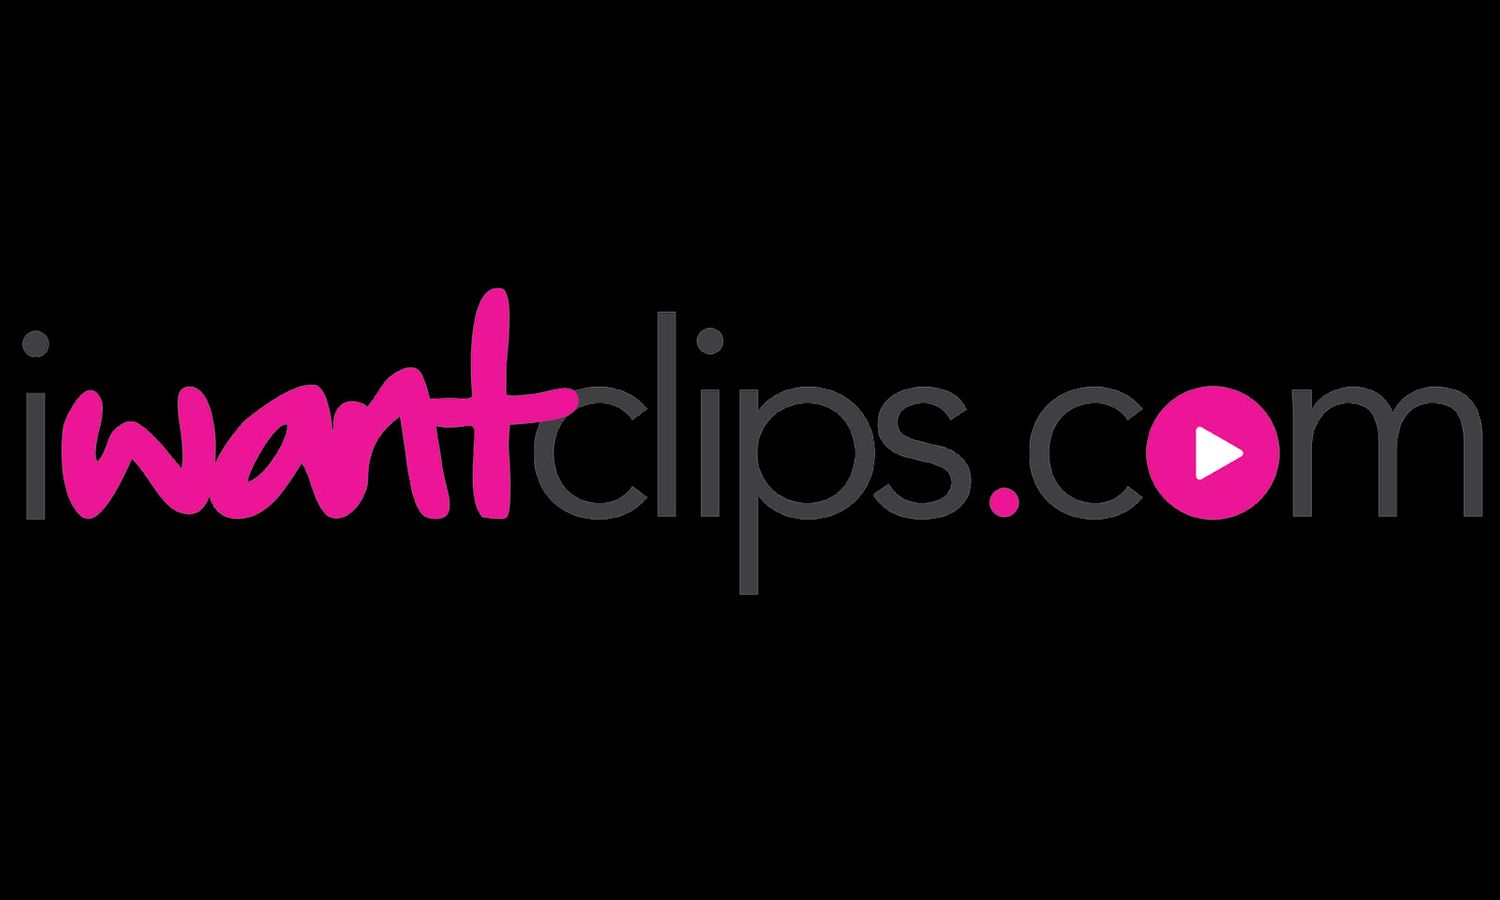 IWantClips.com (includes iWantCustomClips)